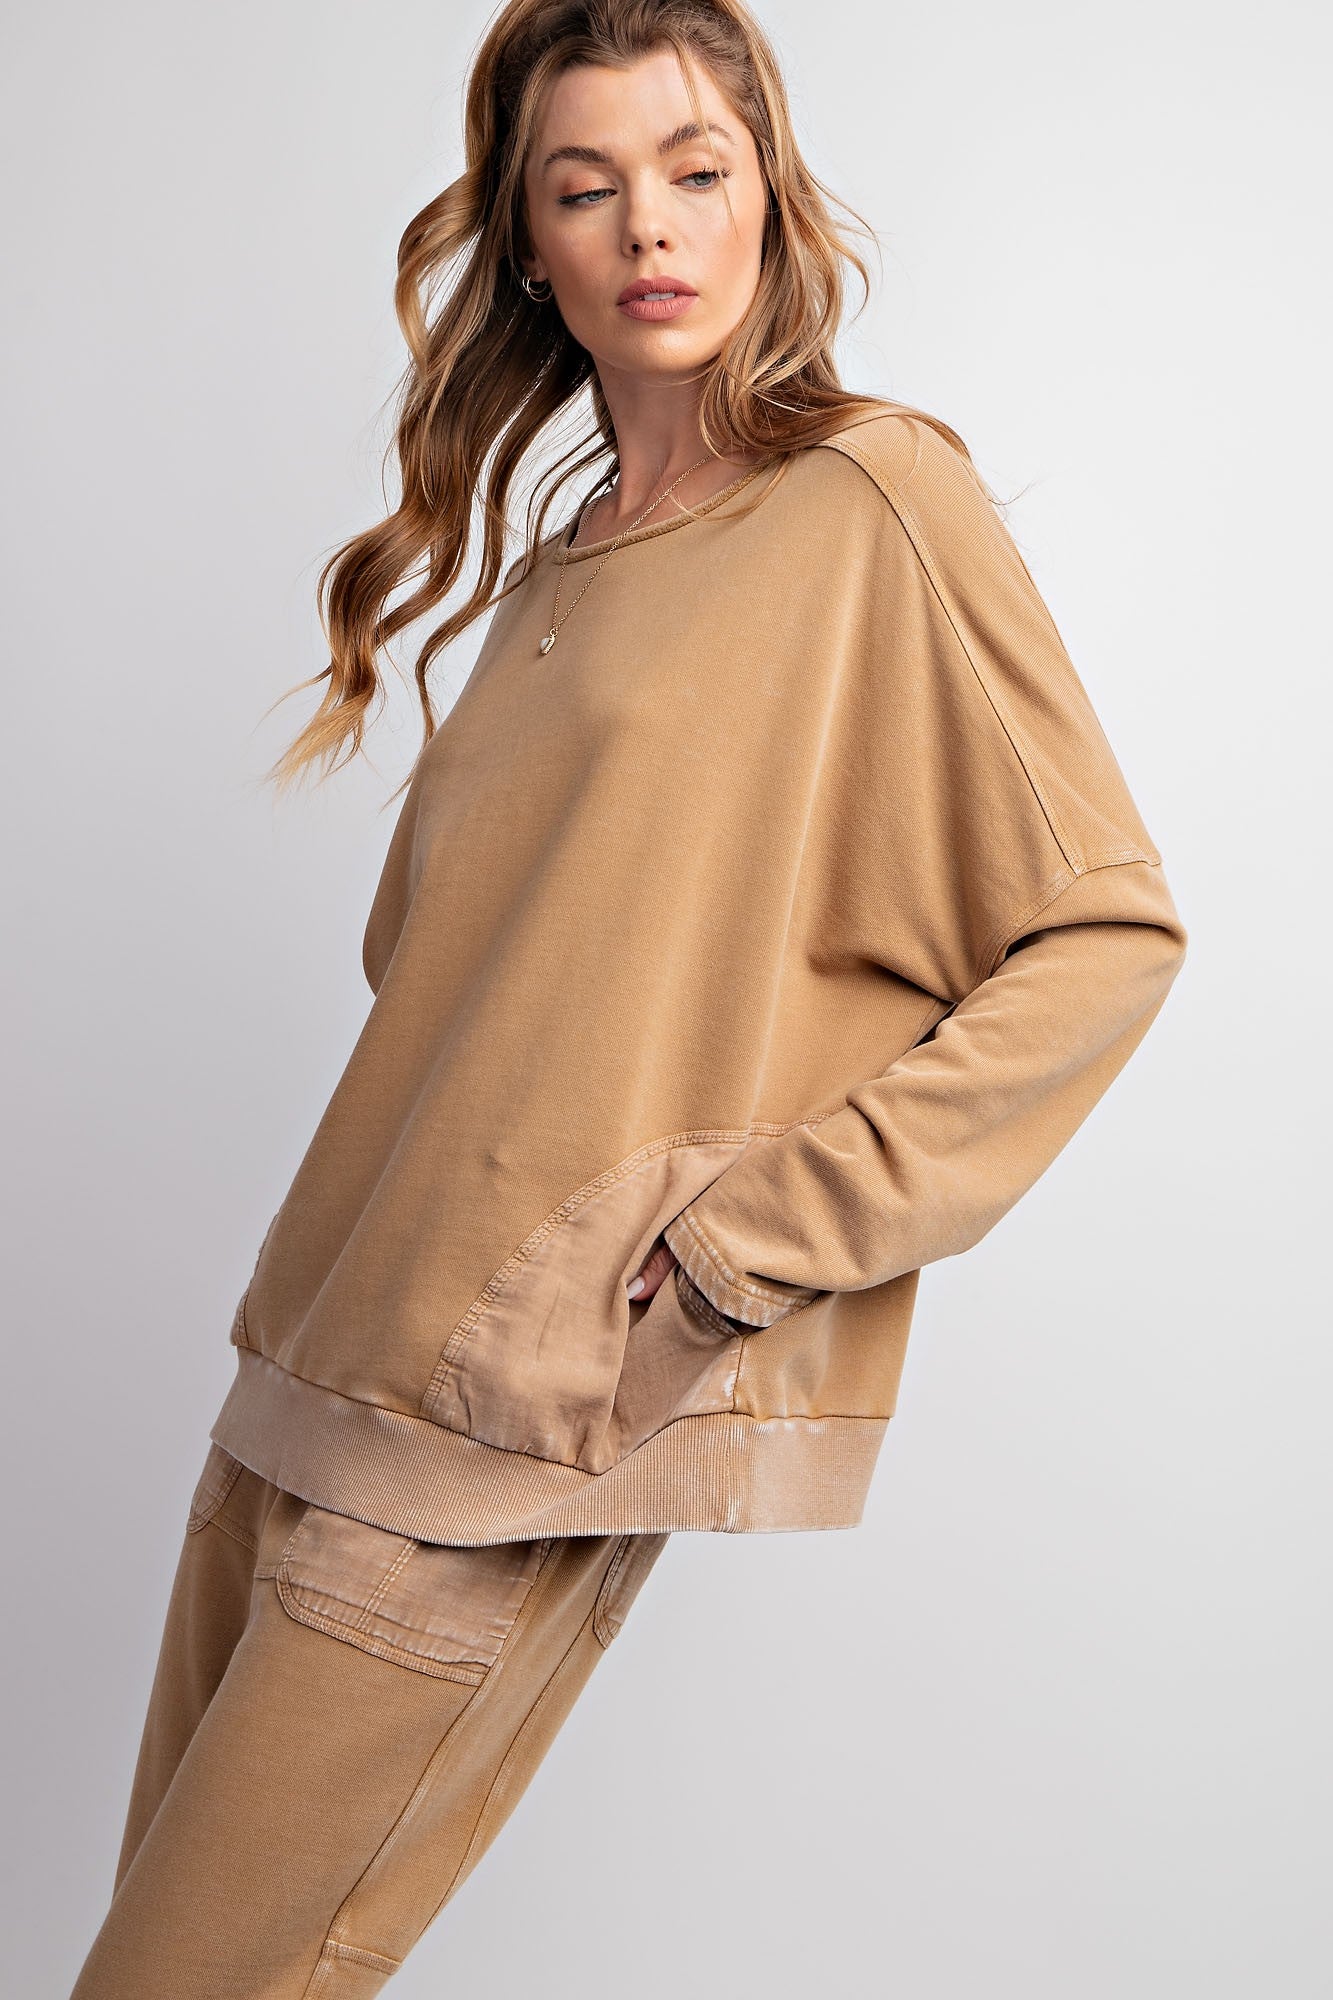 Aubrey Mineral Washed Pullover